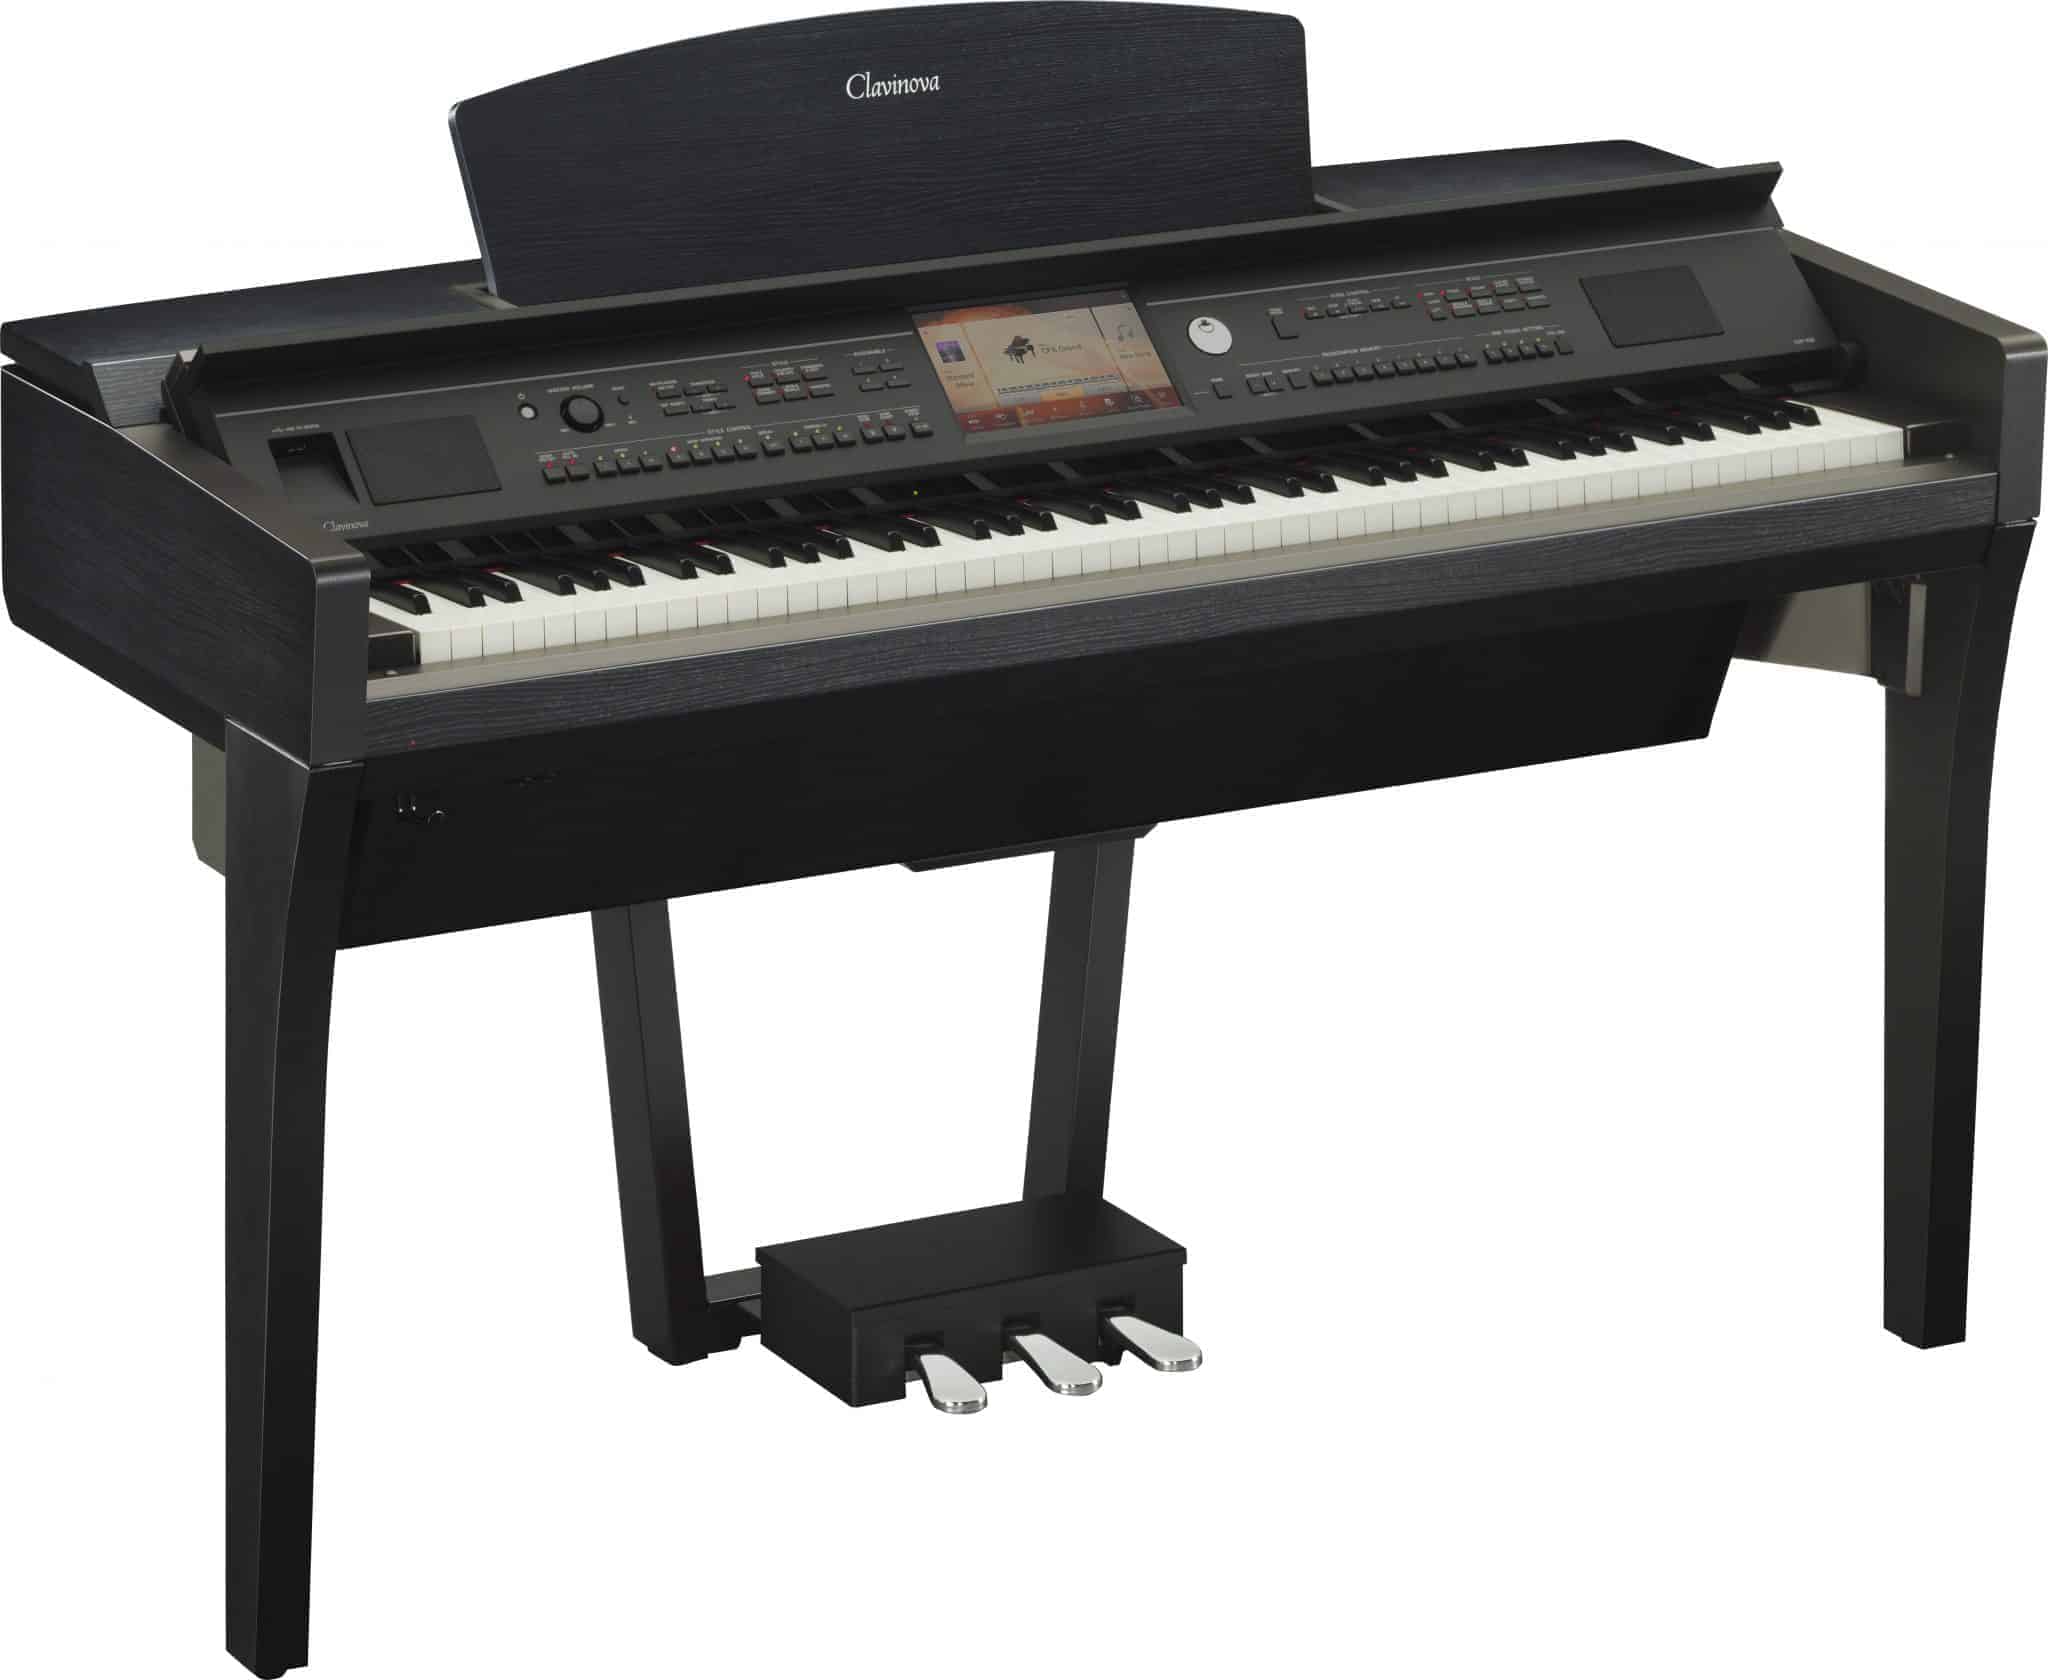 New Digital Pianos for Sale